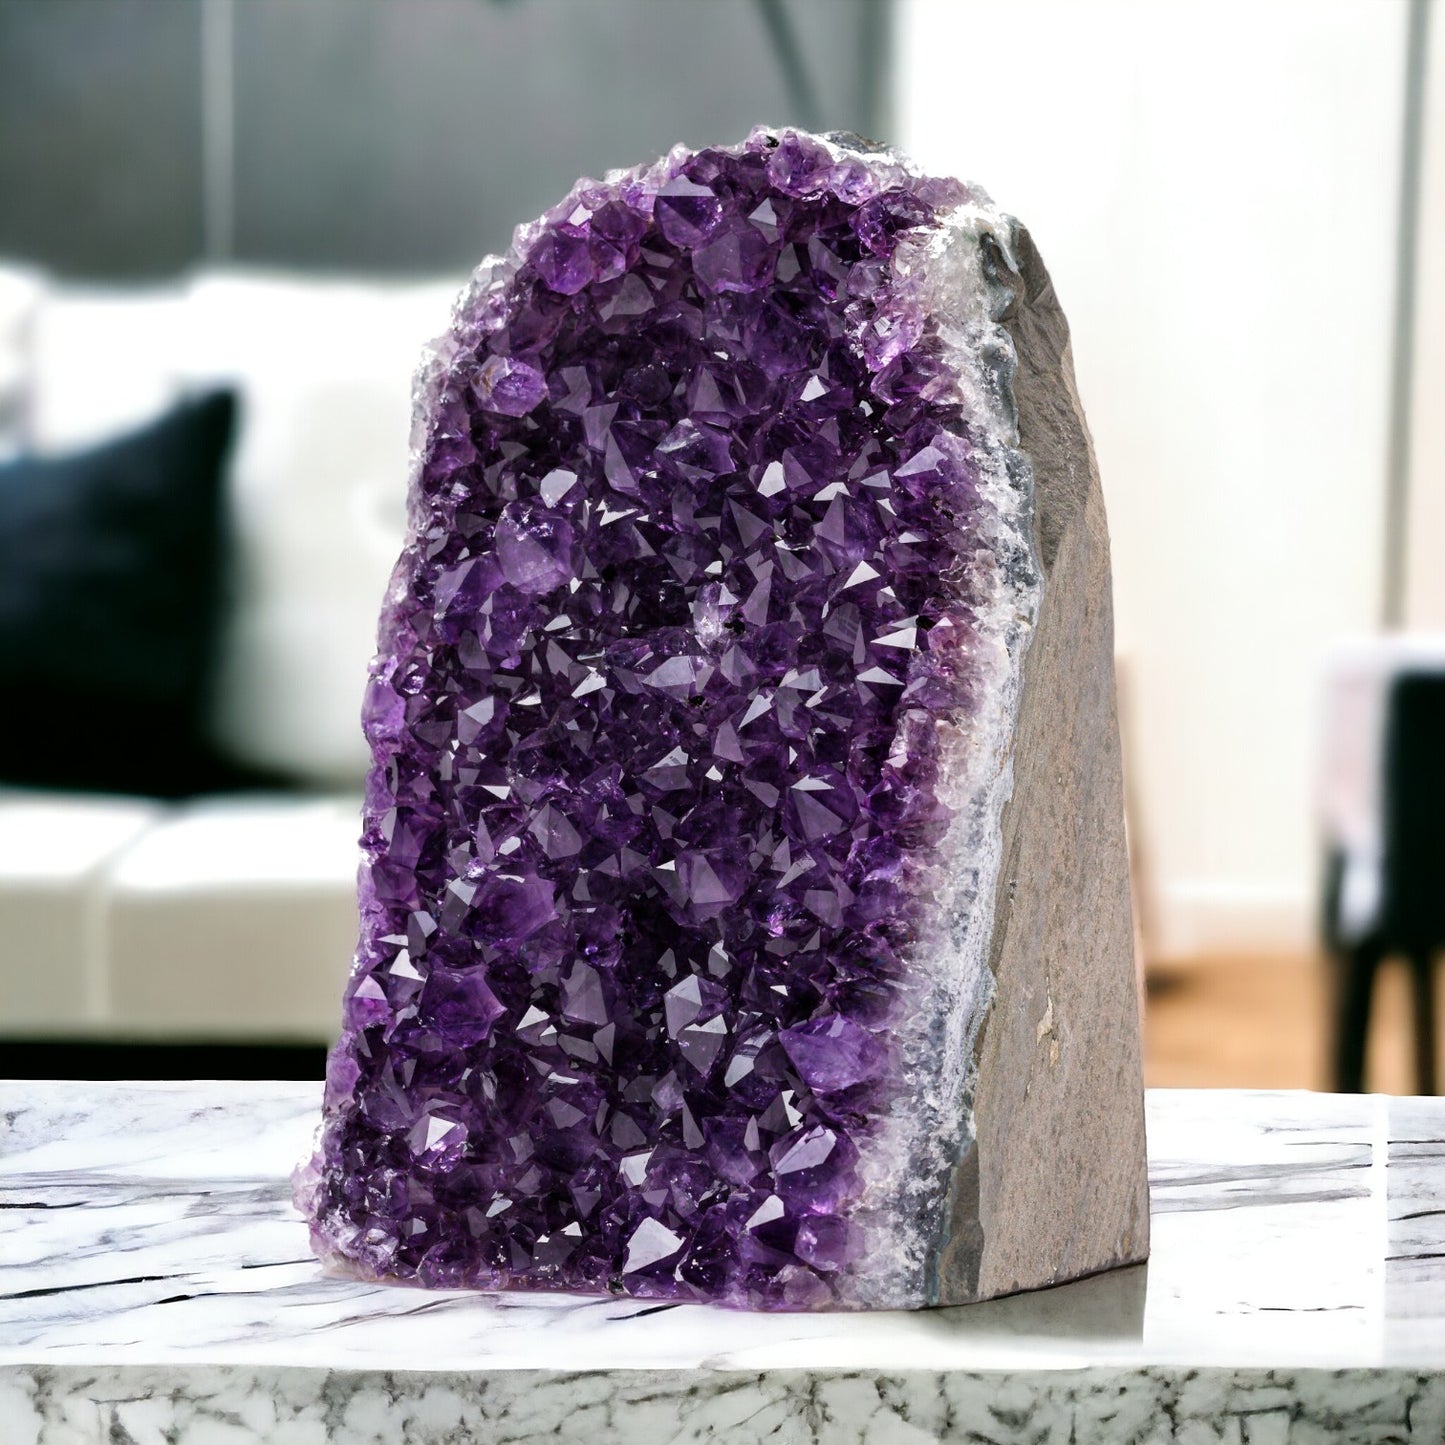 Deep Purple Natural Amethyst Crystal Clusters (3 lb to 4 lb) from Uruguay Raw Geode Quartz